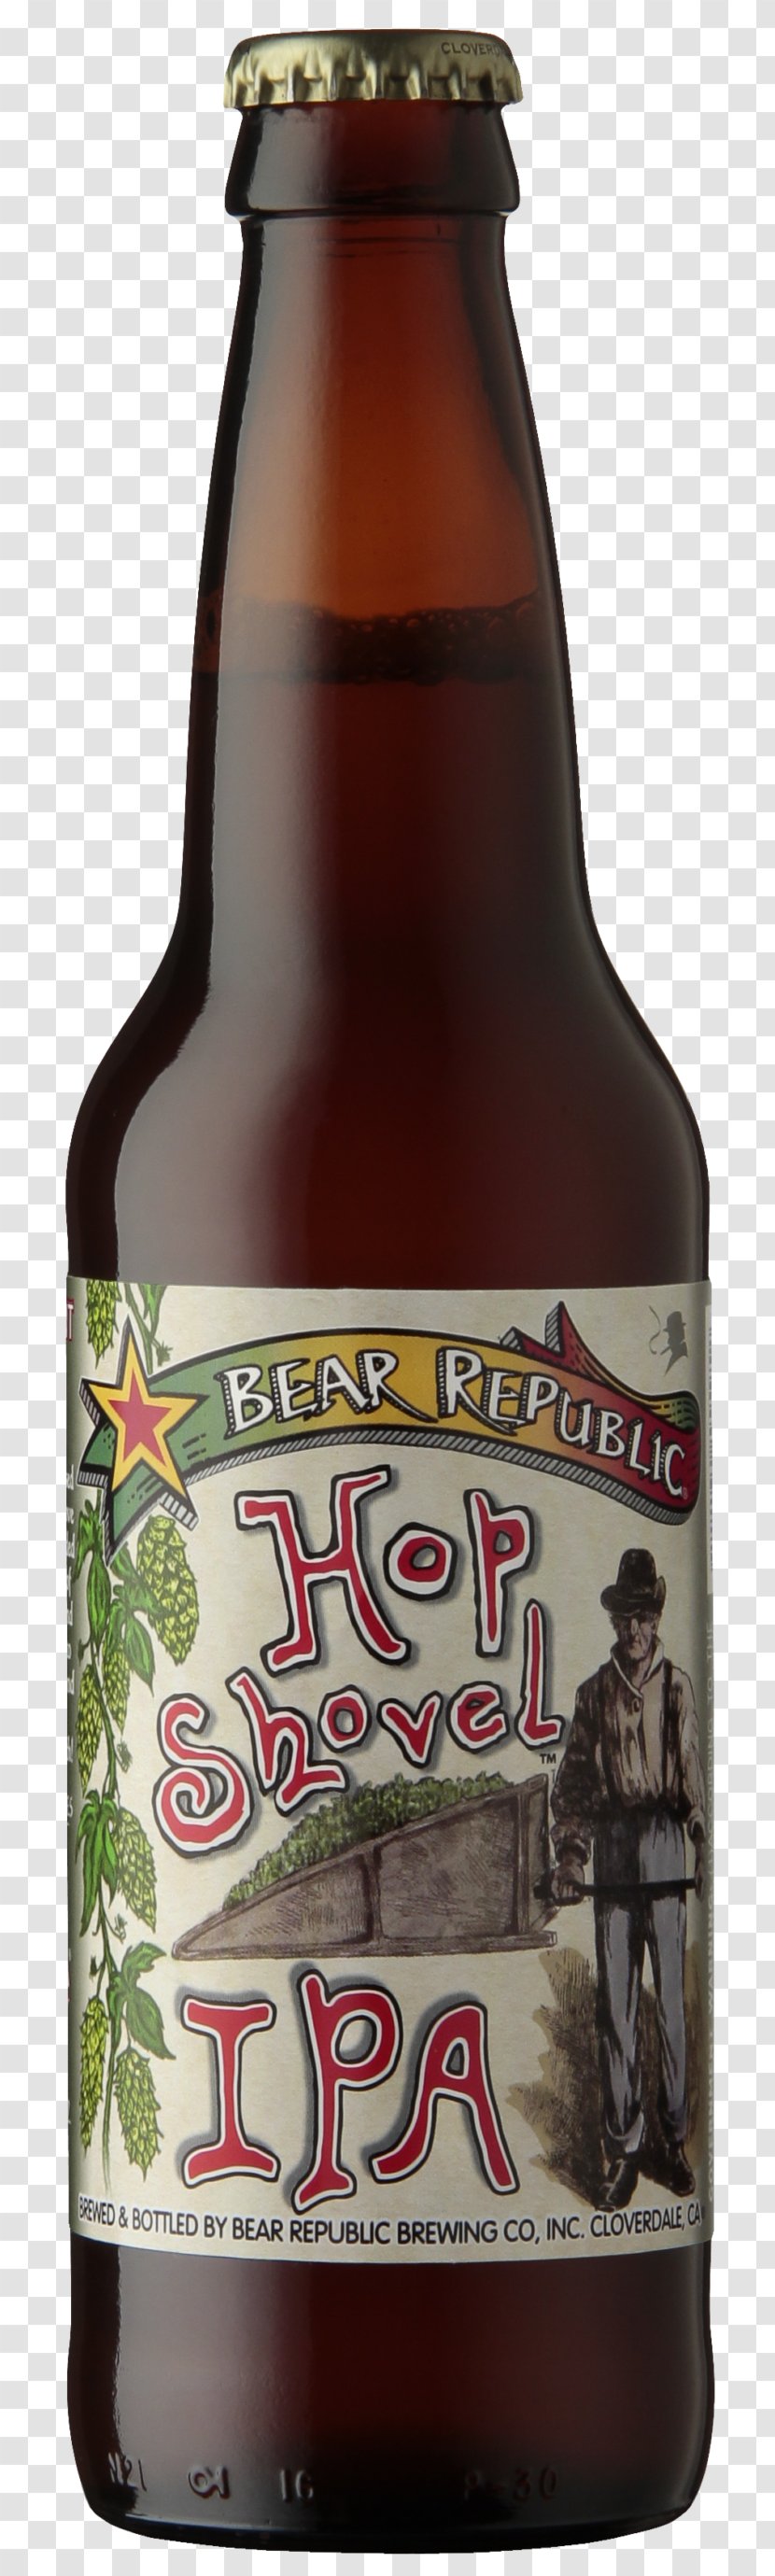 India Pale Ale Beer Hops Bear Republic Brewing Company - Glass Bottle Transparent PNG